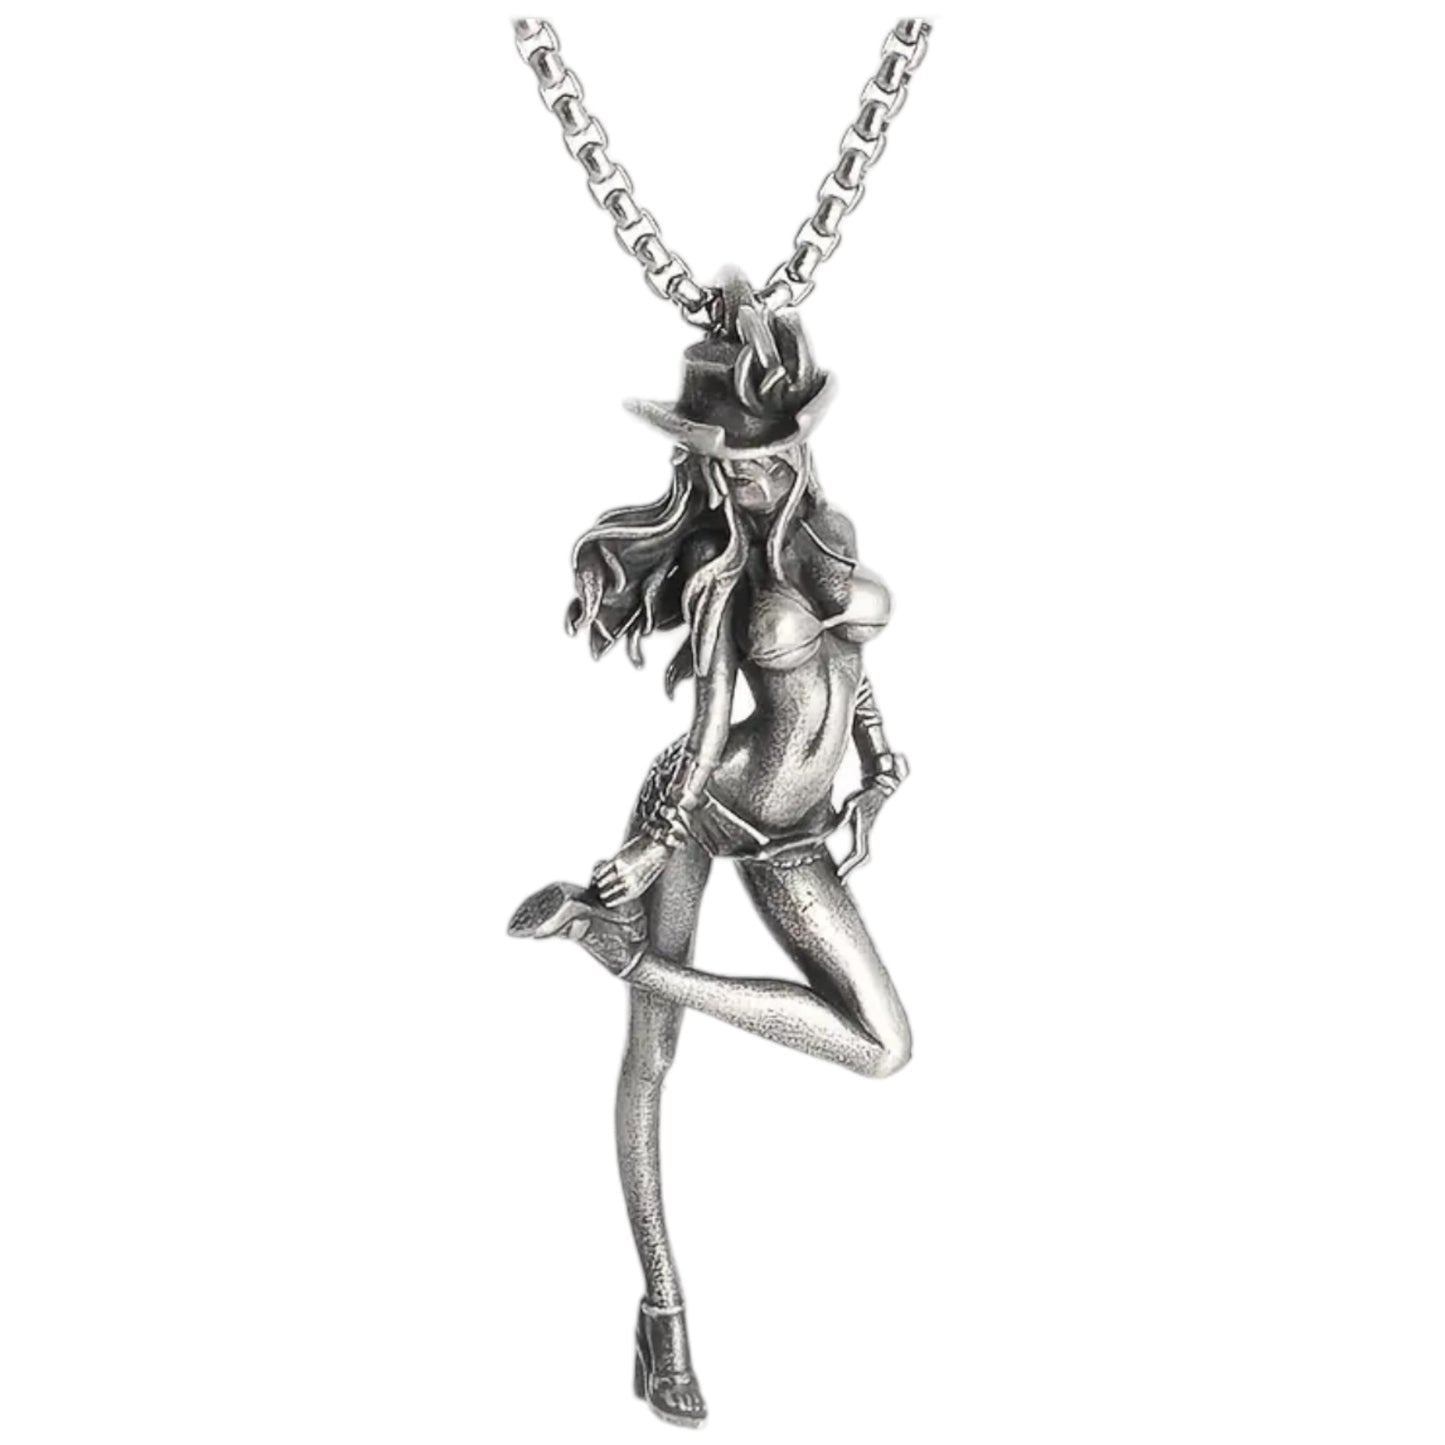 Exclusive Necklace 'Cowgirl Chic' - Woman in Bikini with Cowboy Hat